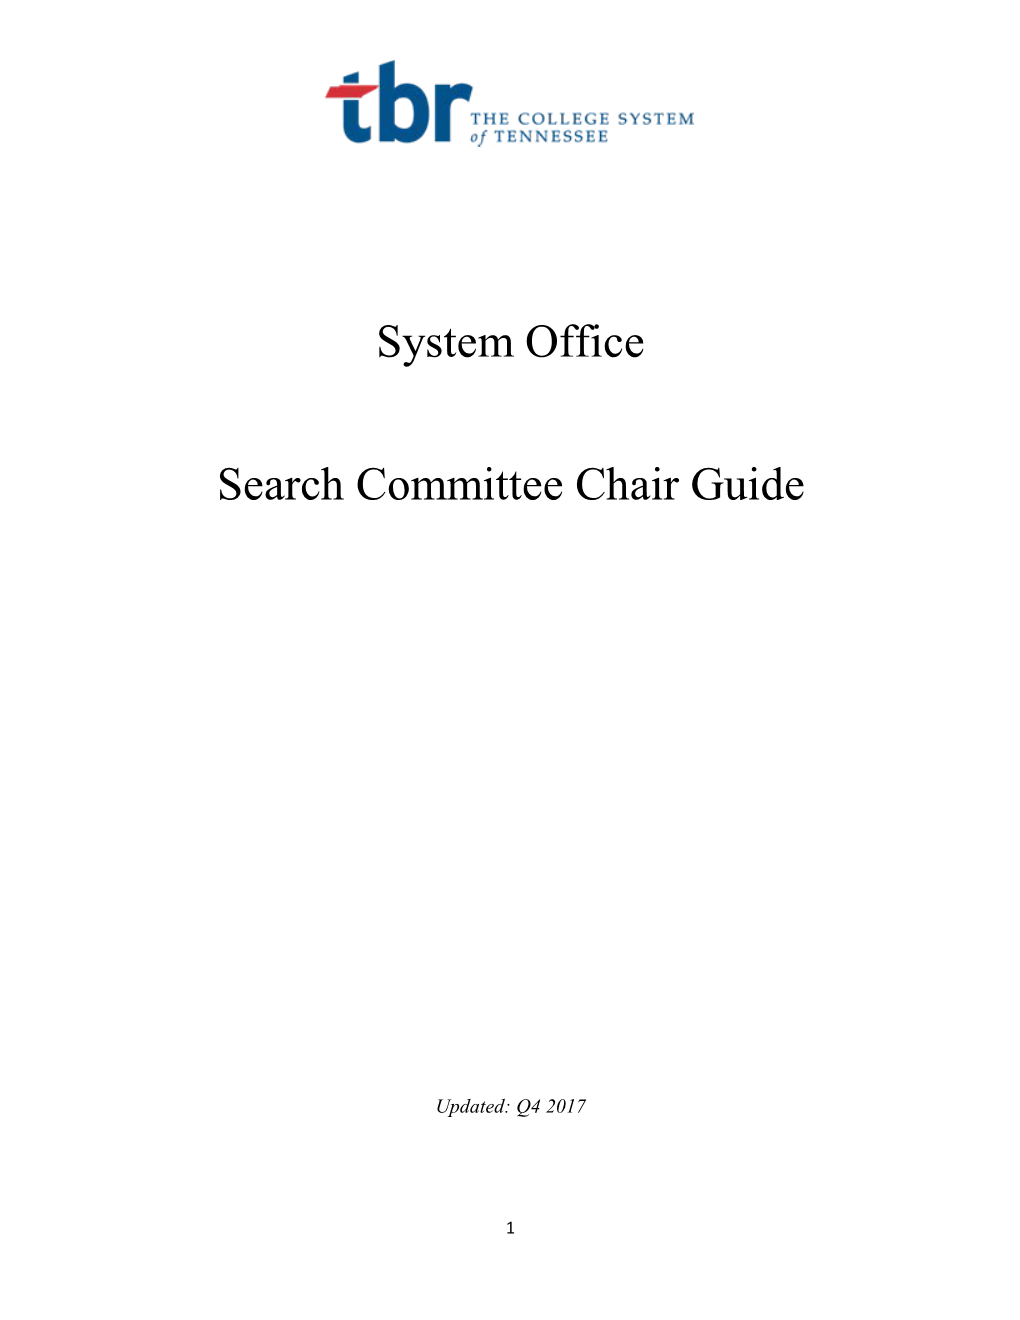 Search Committee Chair Guide